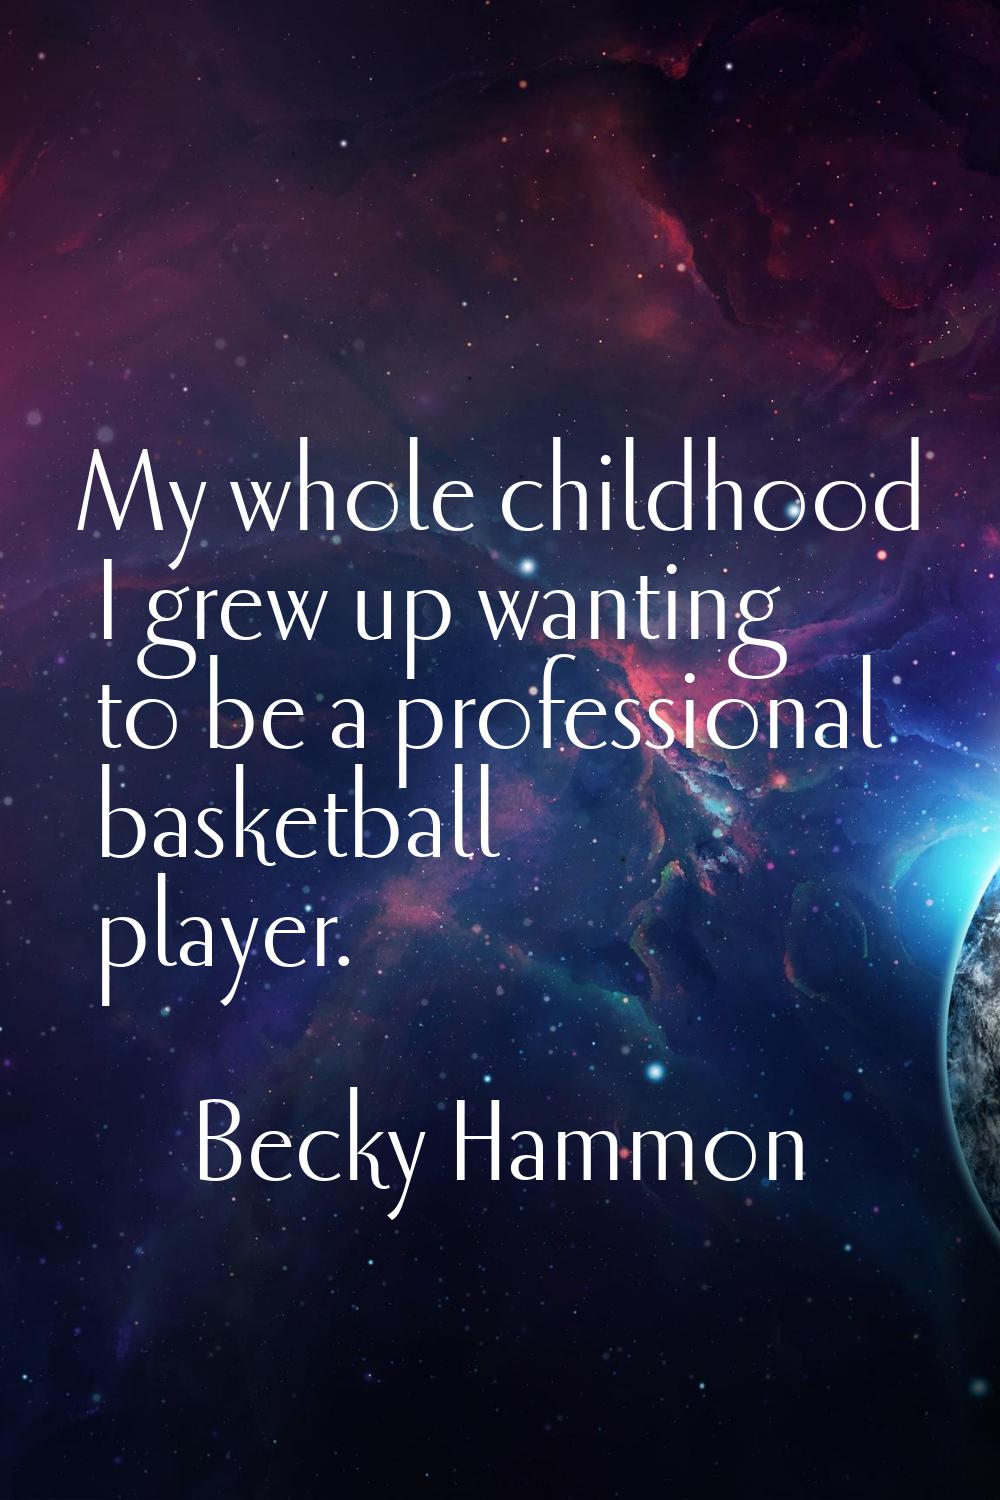 My whole childhood I grew up wanting to be a professional basketball player.